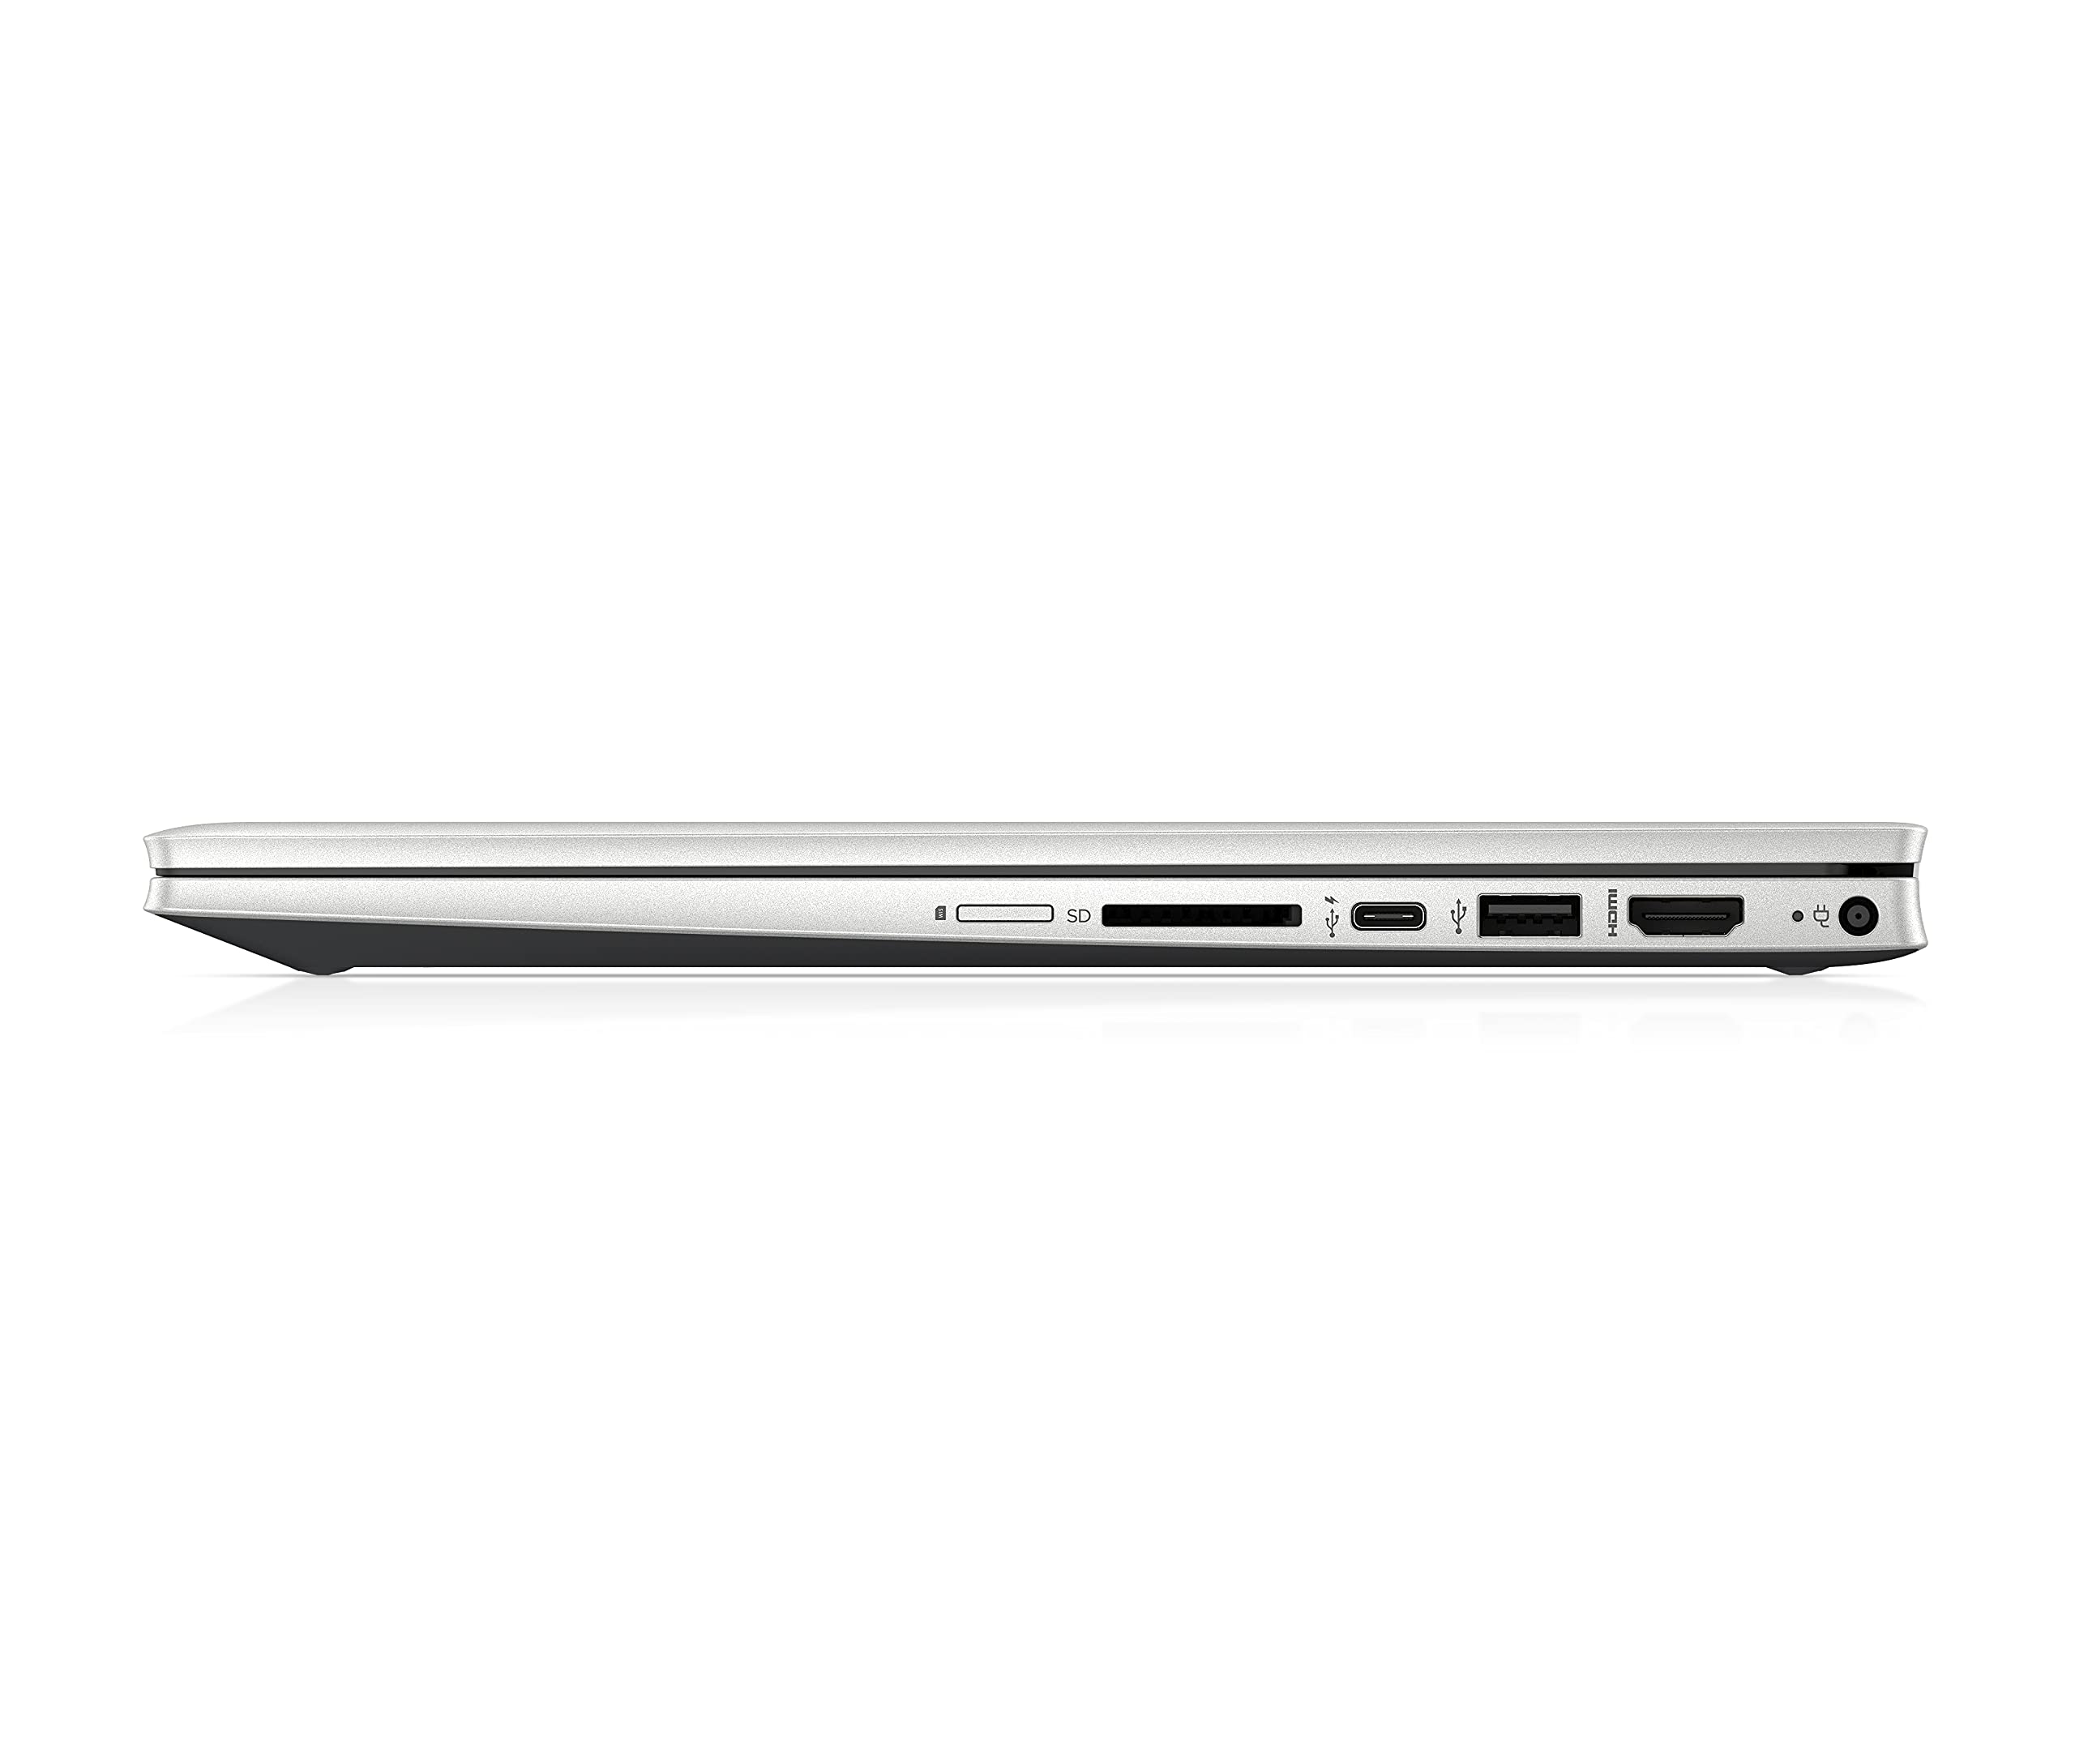 HP 2023 Pavilion x360 14" FHD IPS Touchscreen Premium 2-in-1 Laptop, 11th Gen Intel 4-Core i5-1135G7 Upto 4.2GHz, 16GB RAM, 2TB PCIe SSD, Windows 11 Home + HDMI Cable, Silver